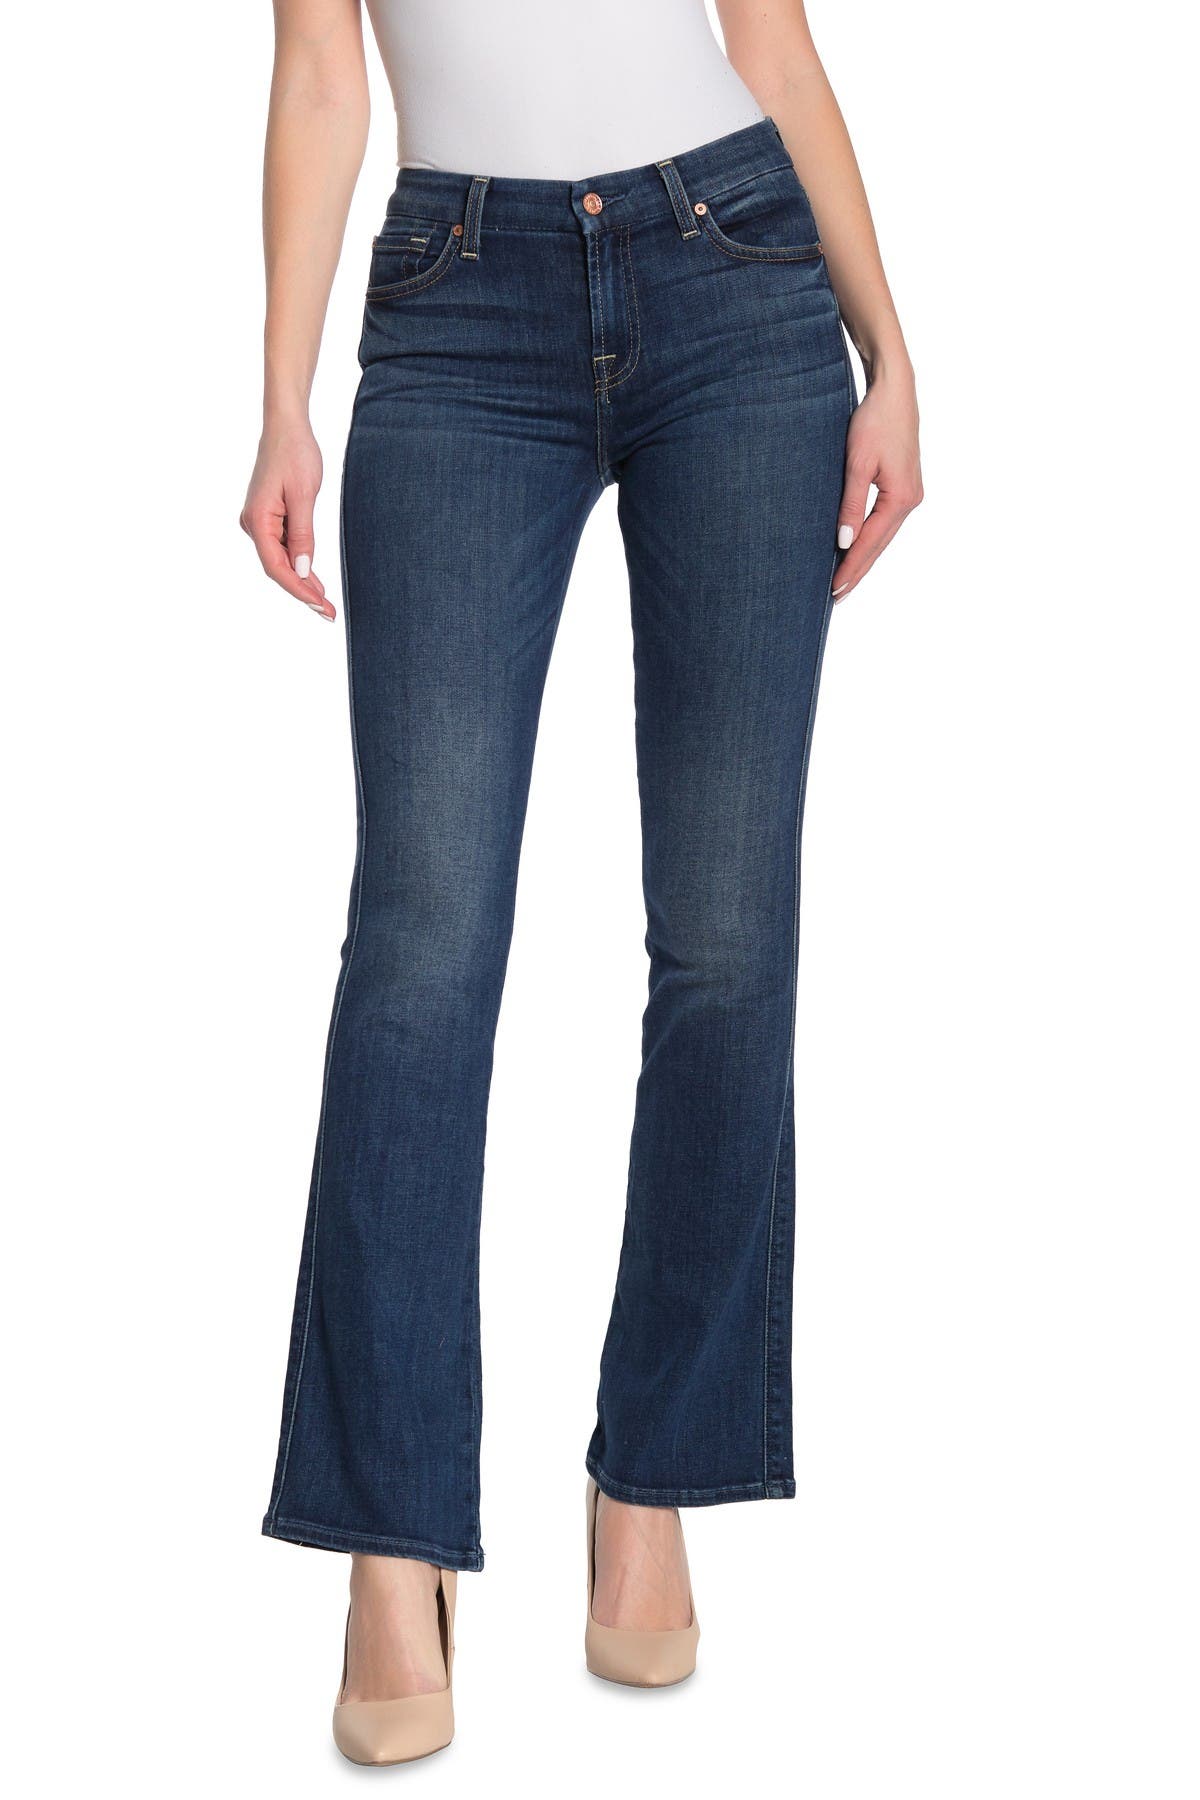 seven for all mankind mens bootcut jeans